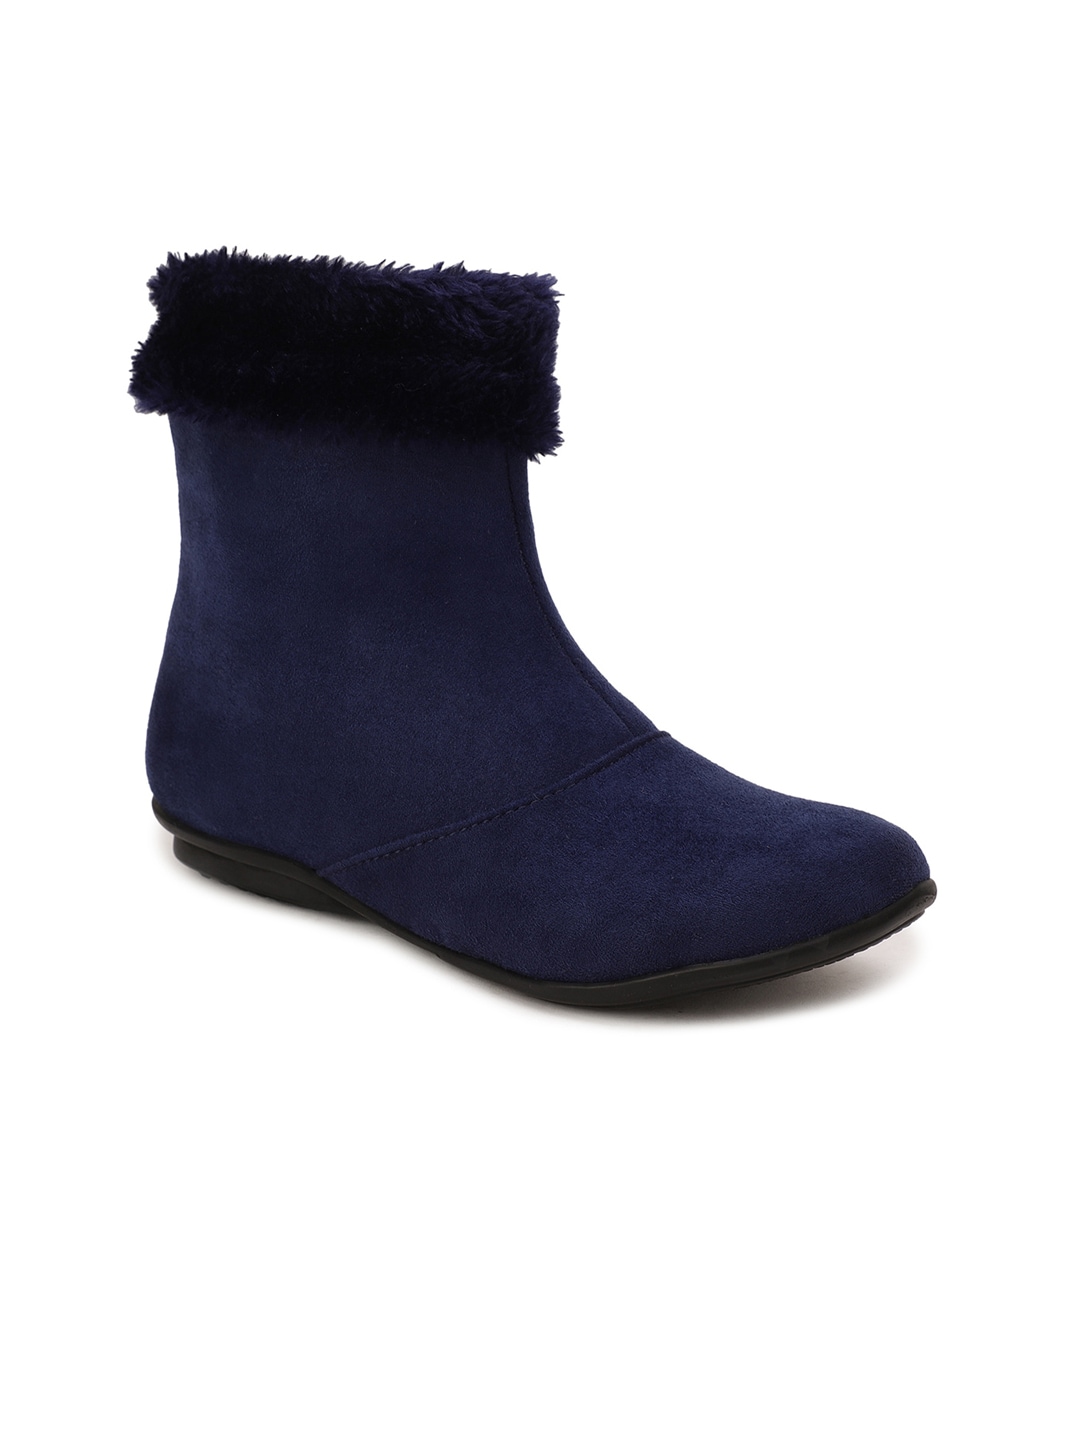 Bruno Manetti Women Navy Blue High-Top Suede Flat Boots Price in India